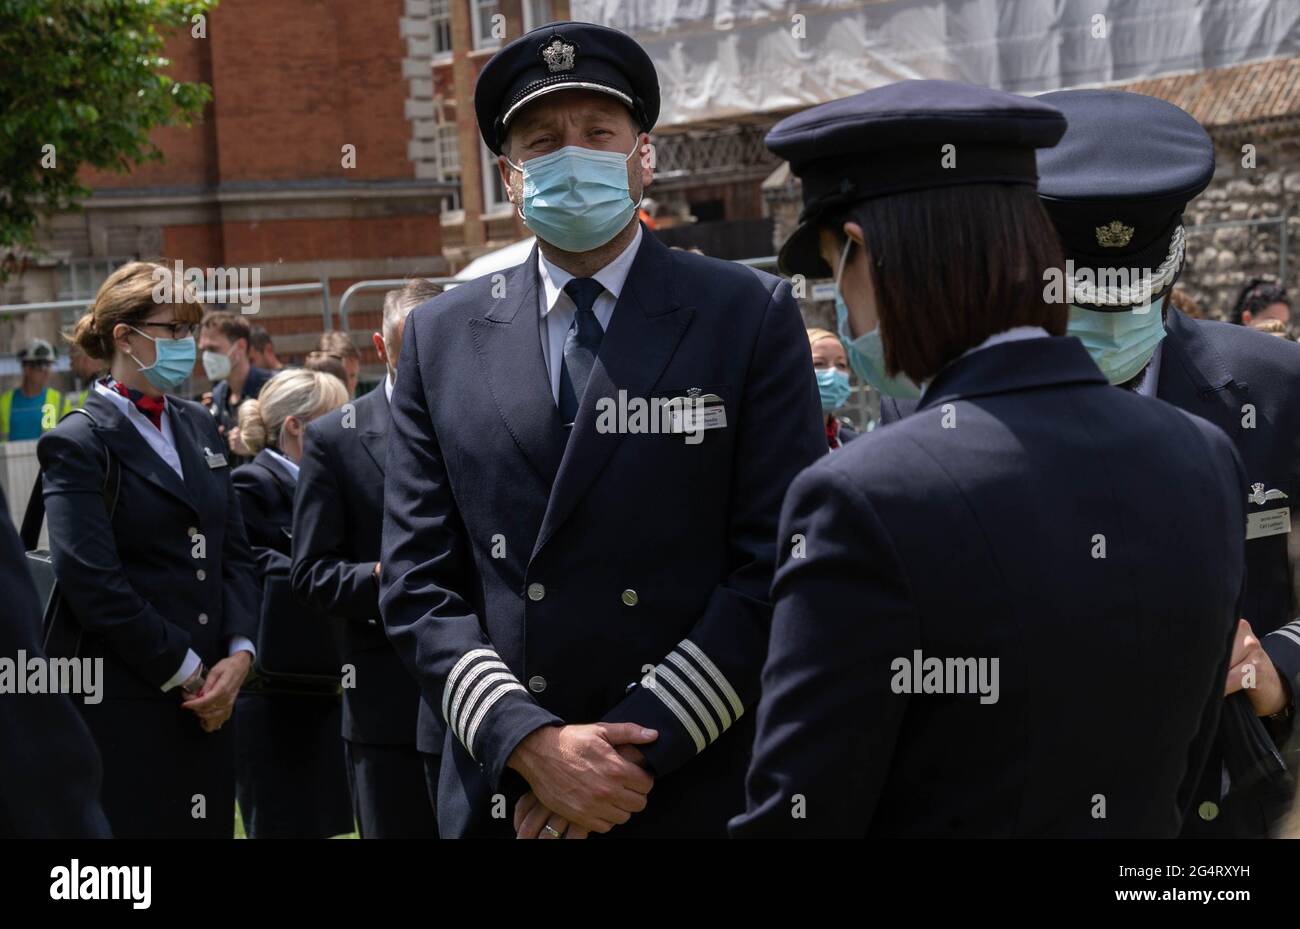 London, UK. 23rd June, 2021. Members of the travel industry protest outside the Houses of Parliament against UK travel restrictions Credit: Ian Davidson/Alamy Live News Stock Photo